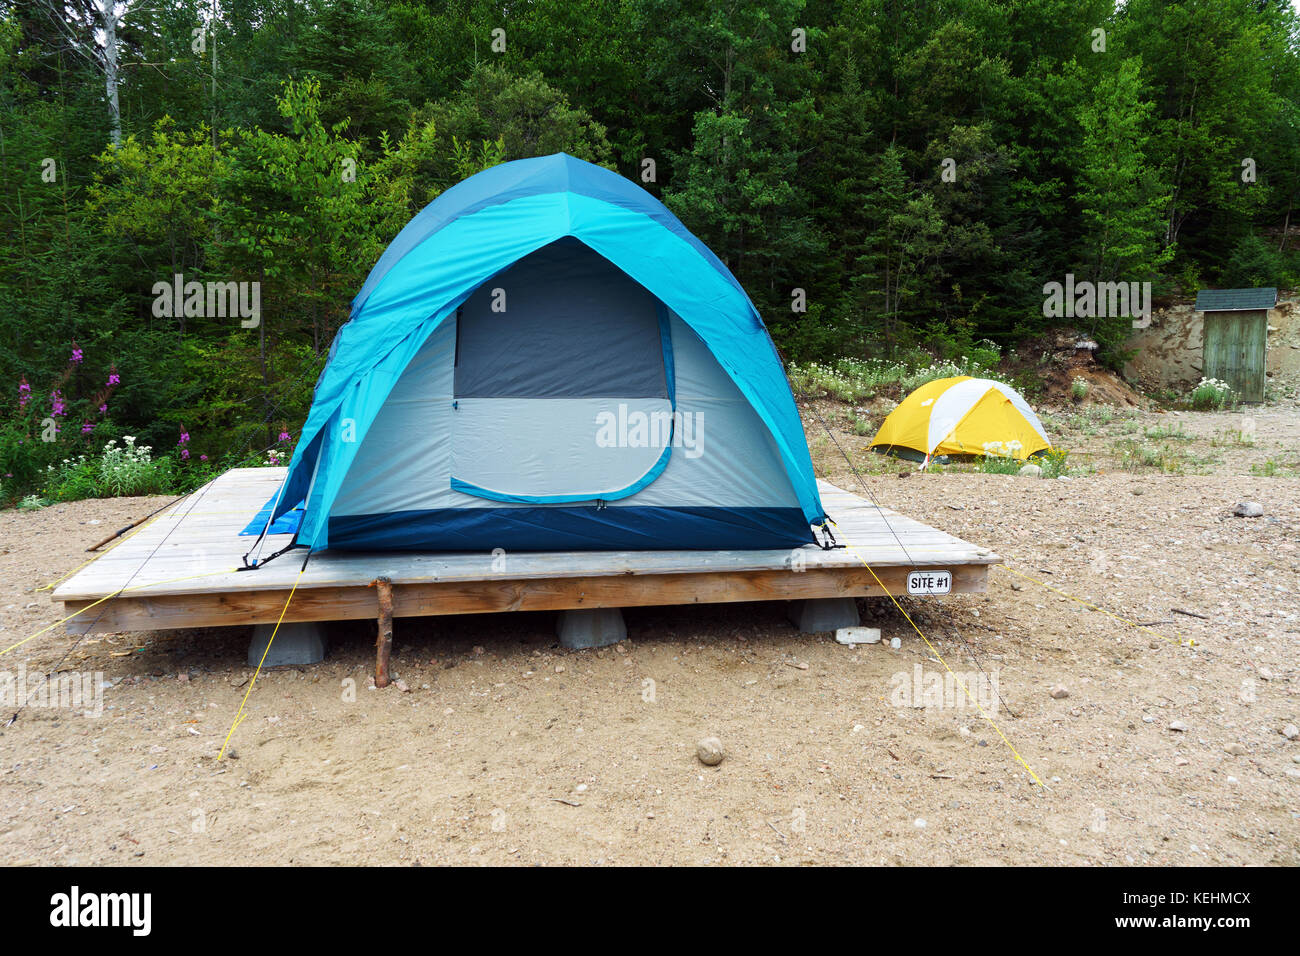 Tent pitched on a wooden platform. Stock Photo